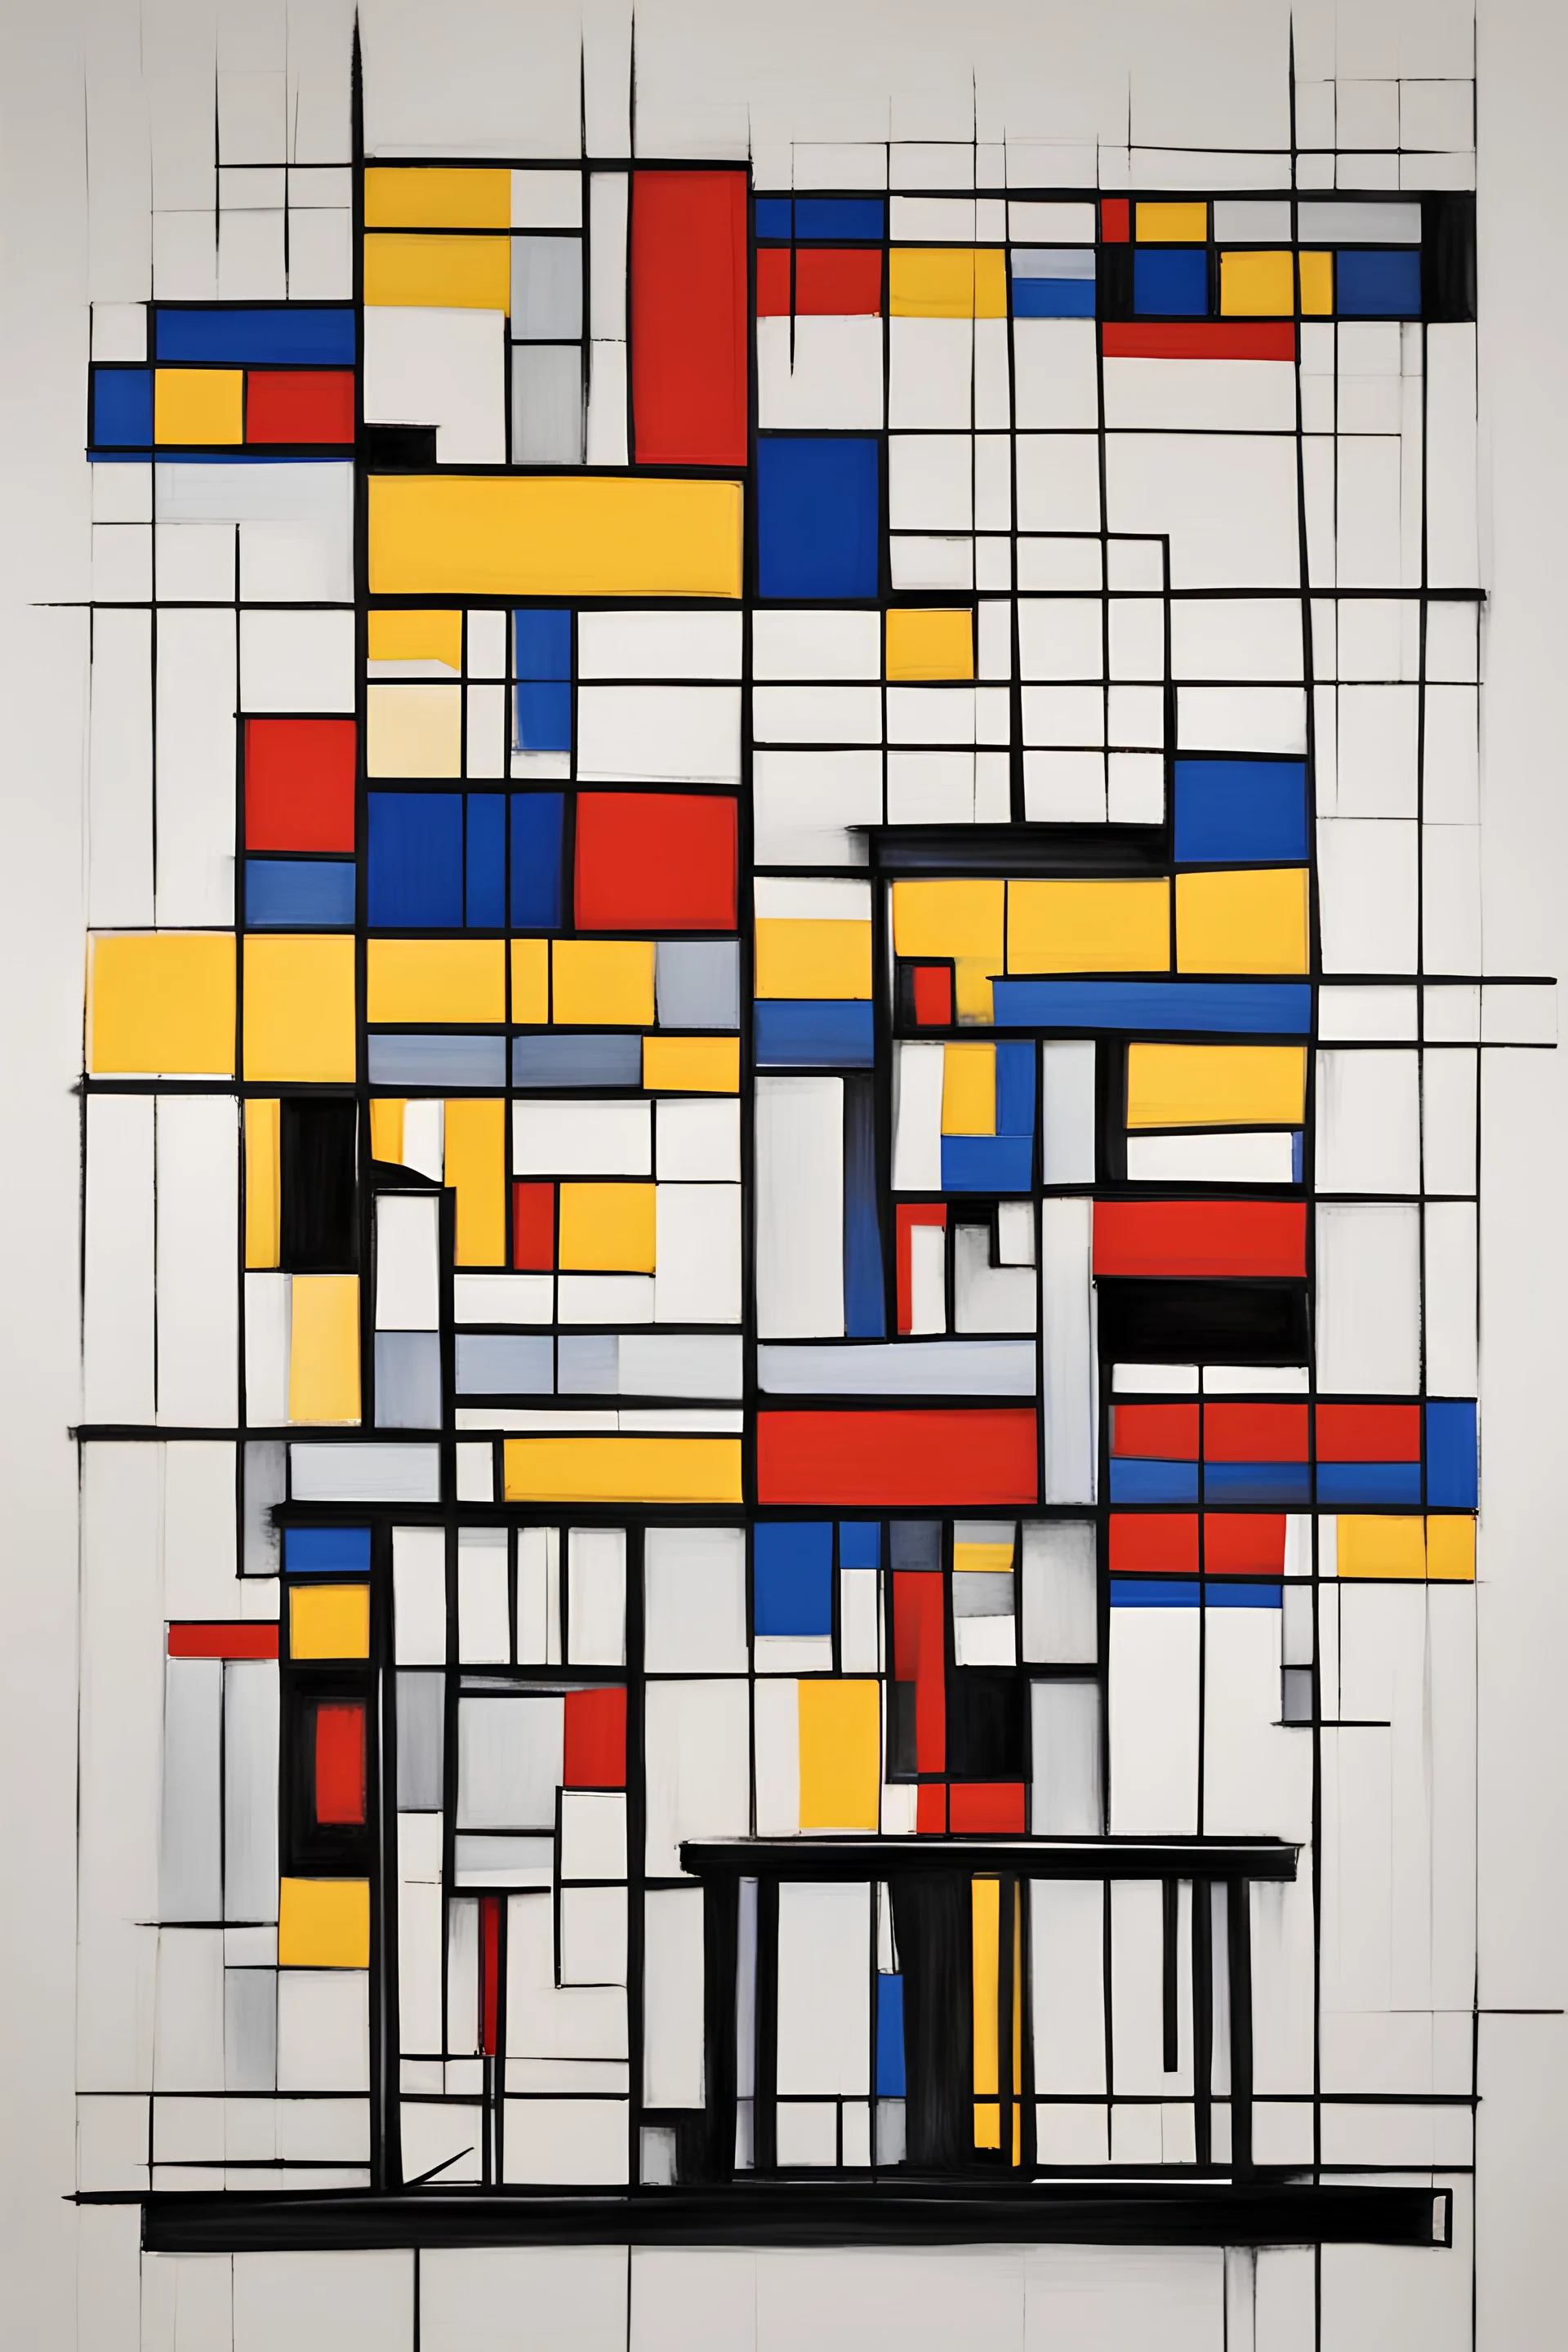 bar trivia team painted in the style of mondrian